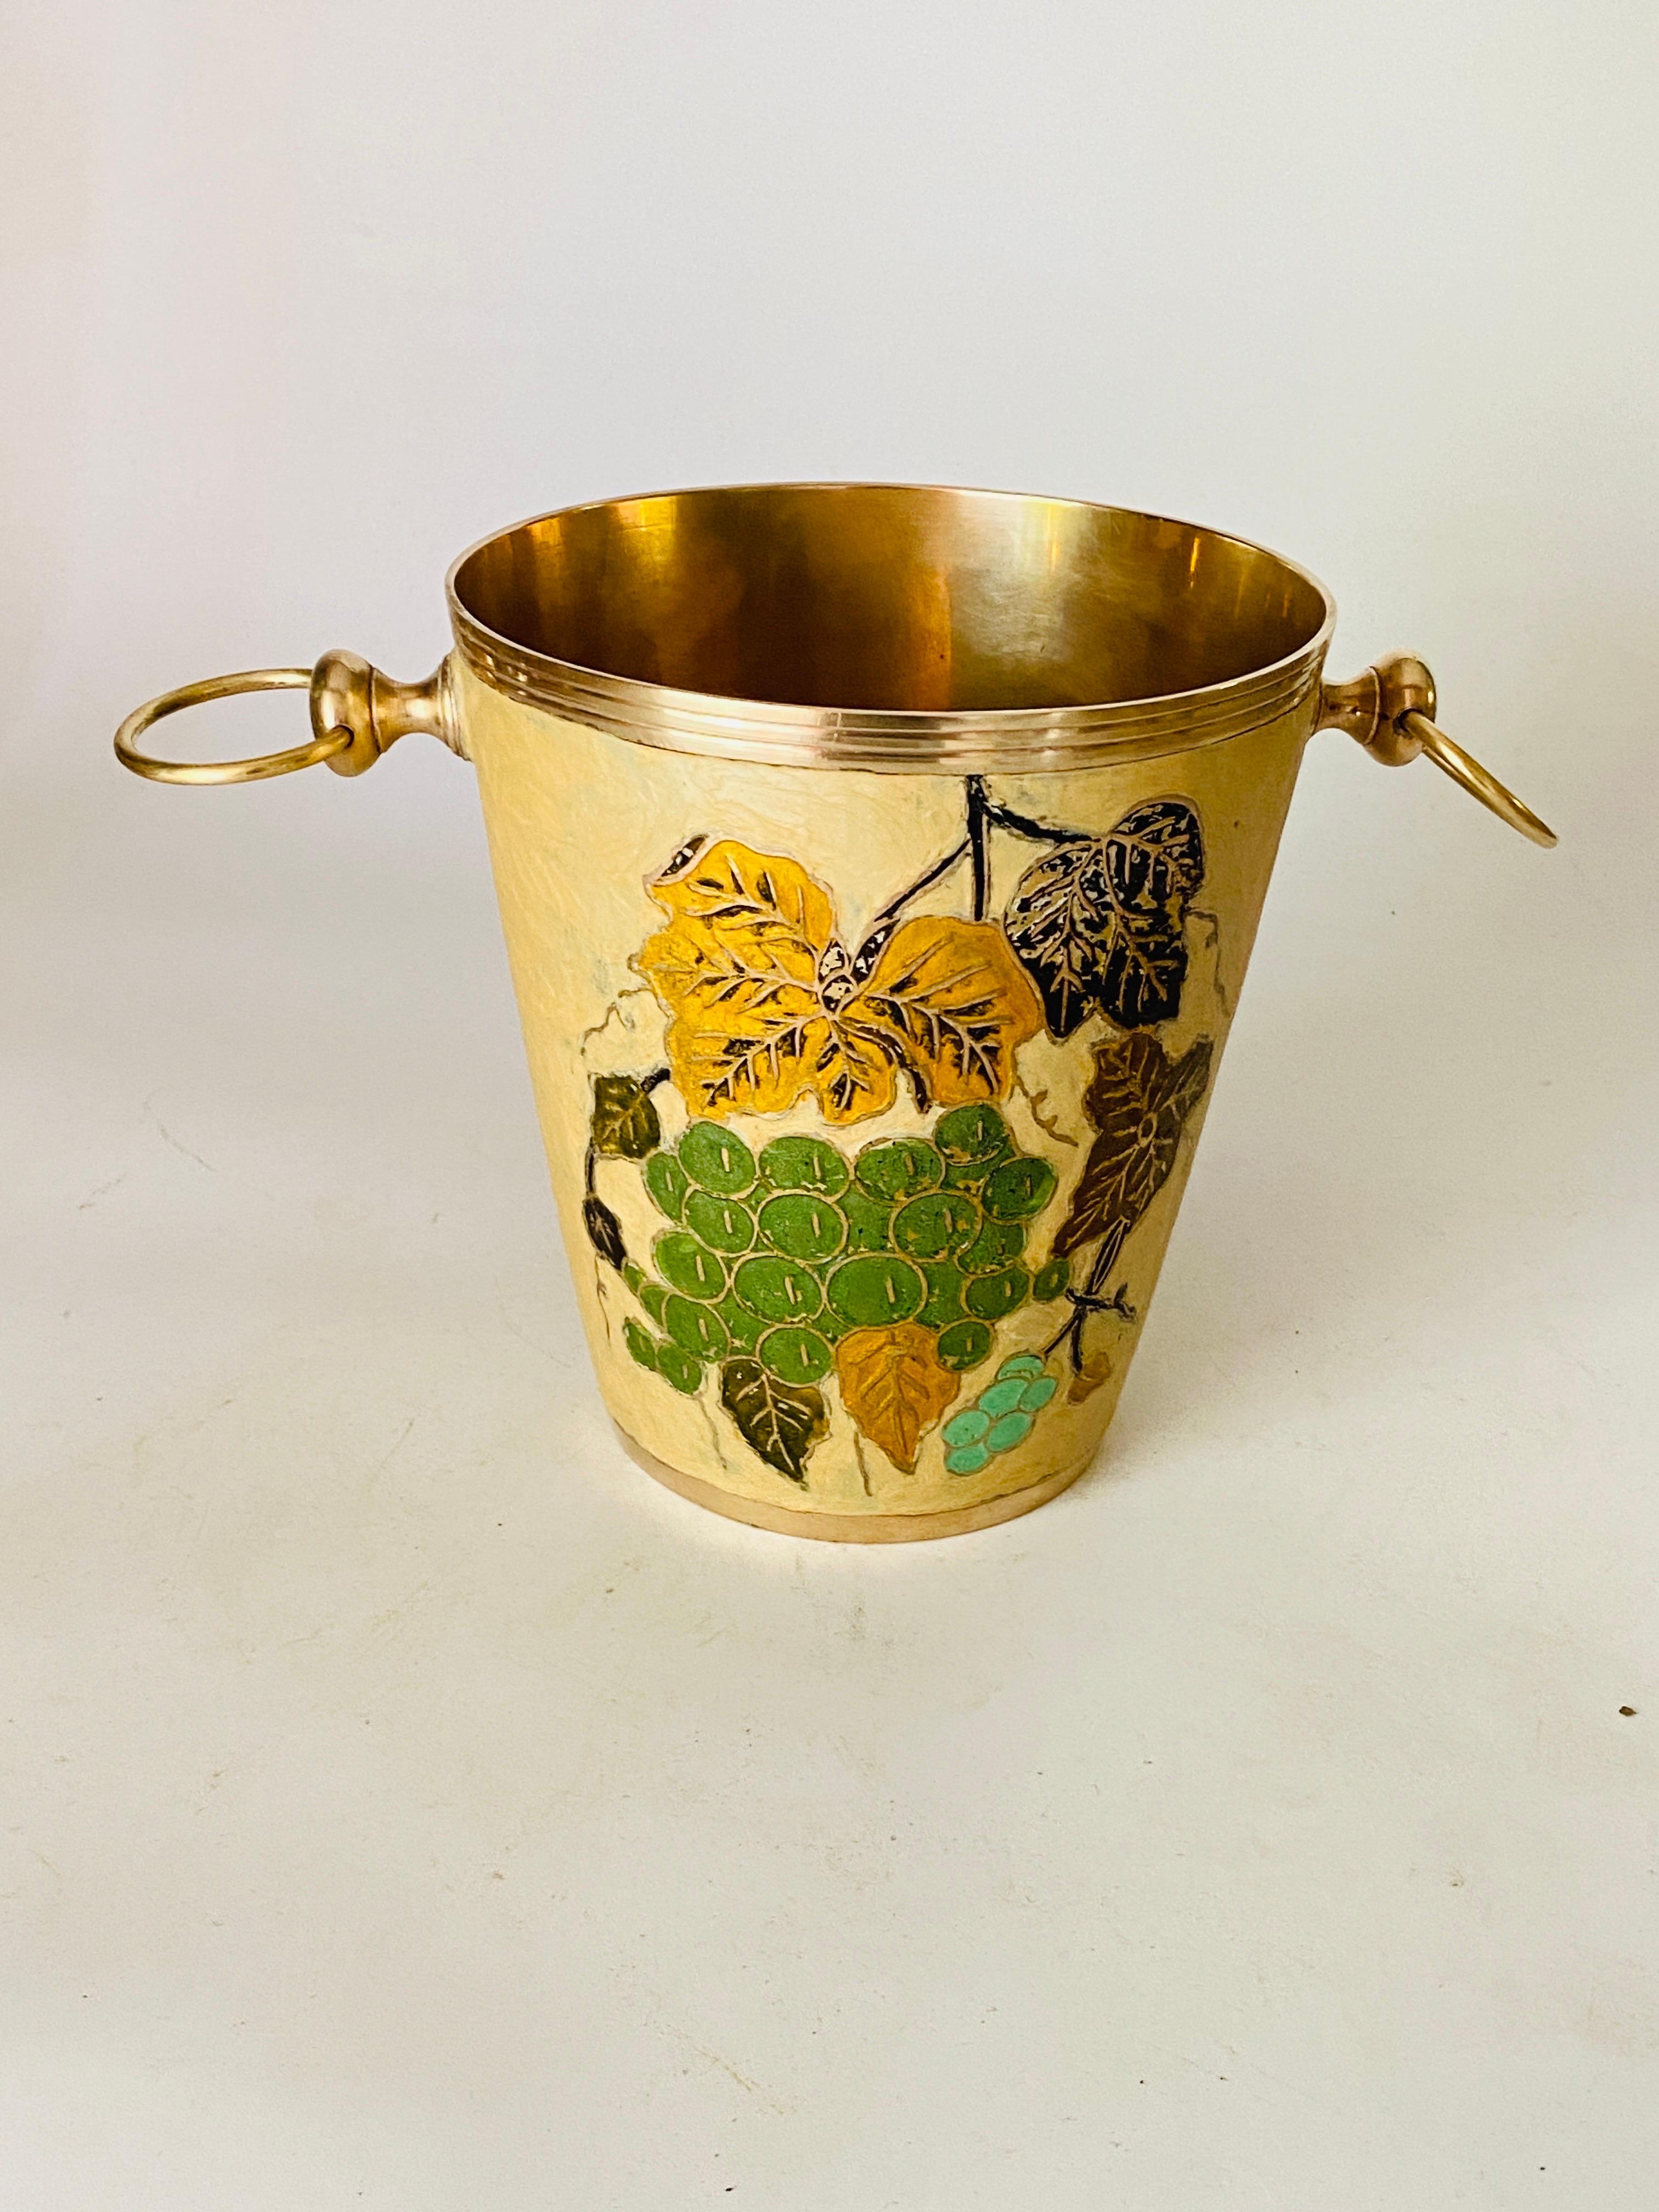 Mid-20th Century Champagne Bucket Cloisonné with Colored Floral Decor Frame Brass Handles France